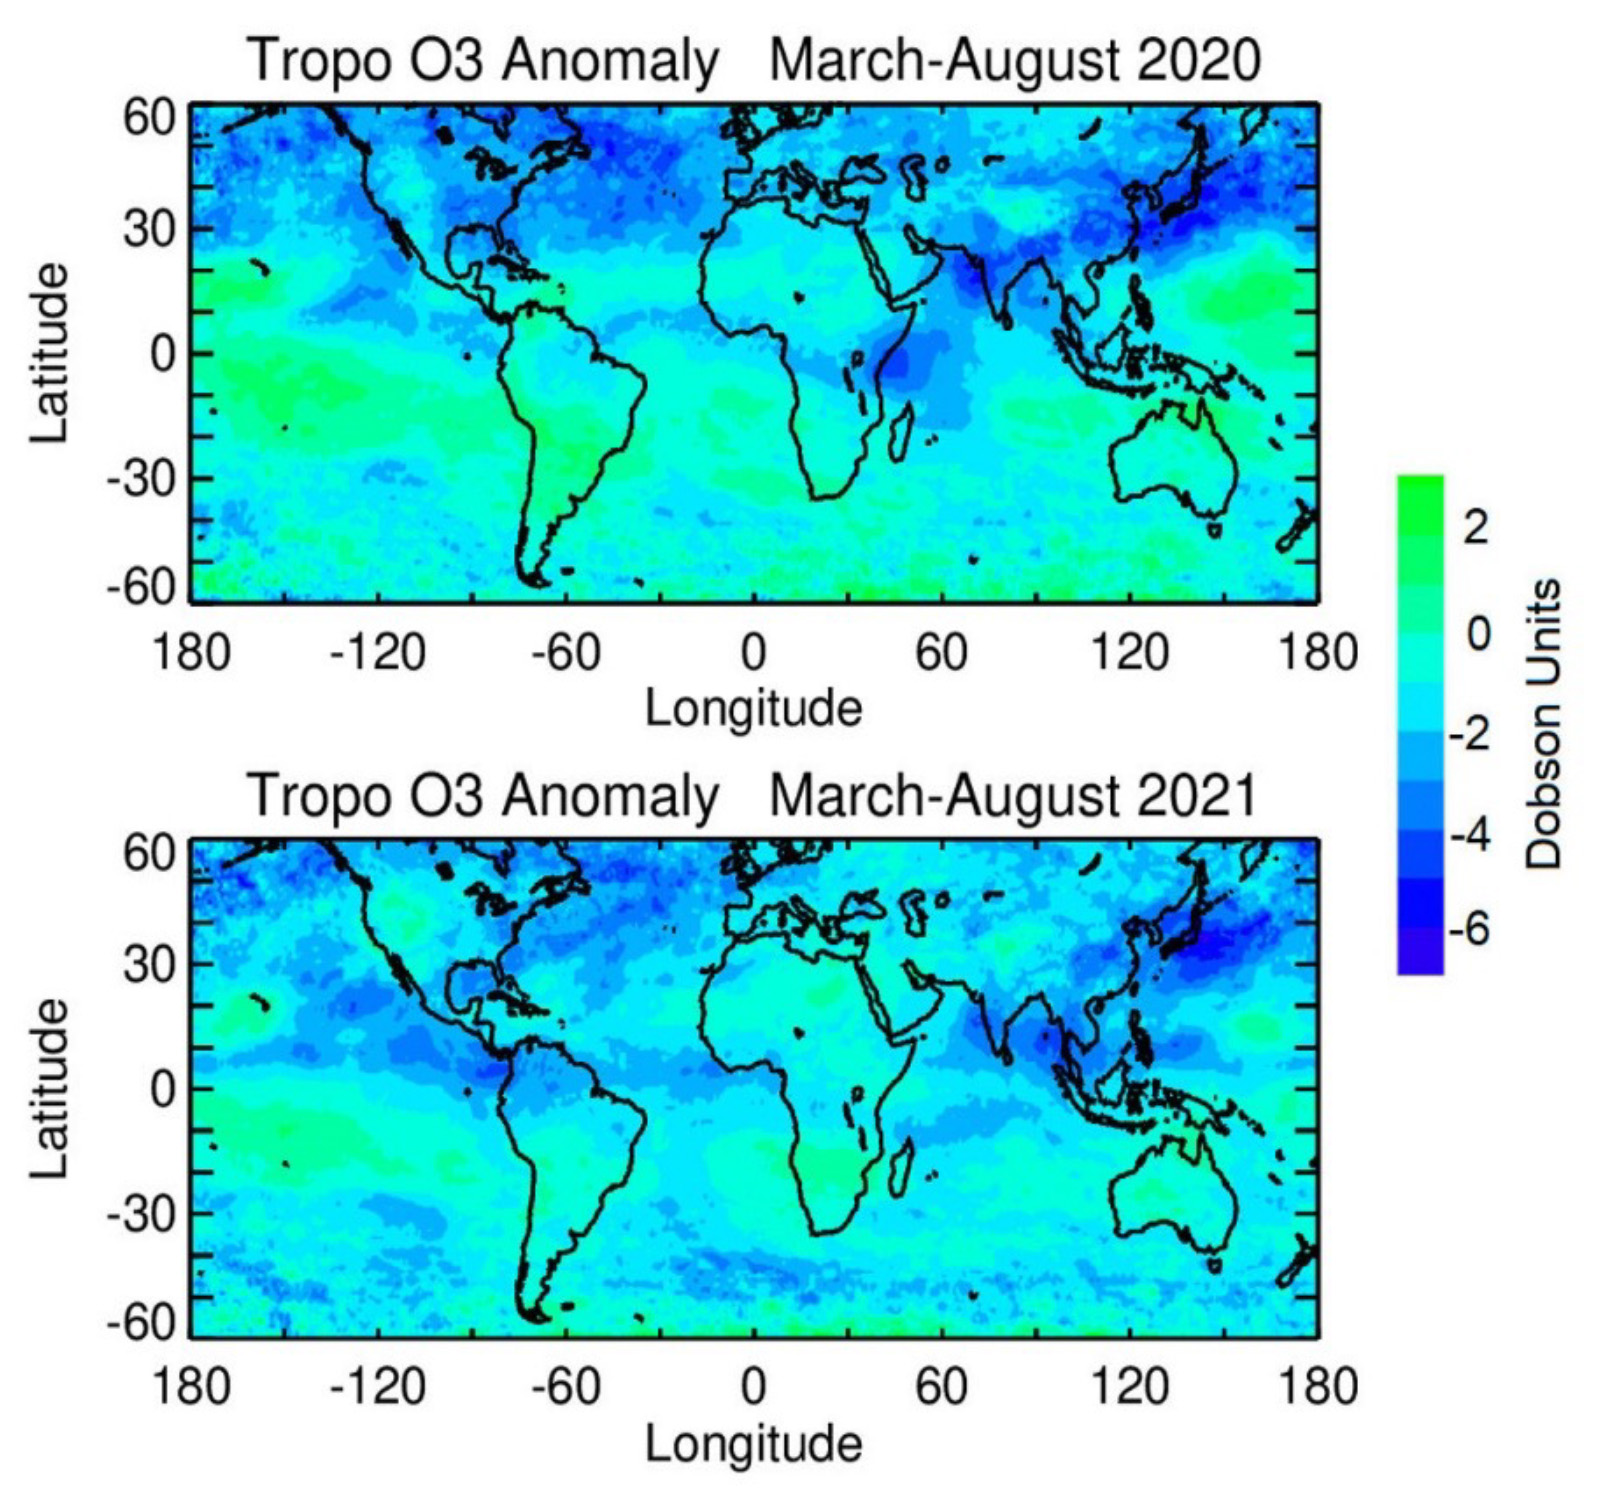 Inter-annual anomalies   in tropospheric column ozone  for March-August 2020 and March-August 2021  